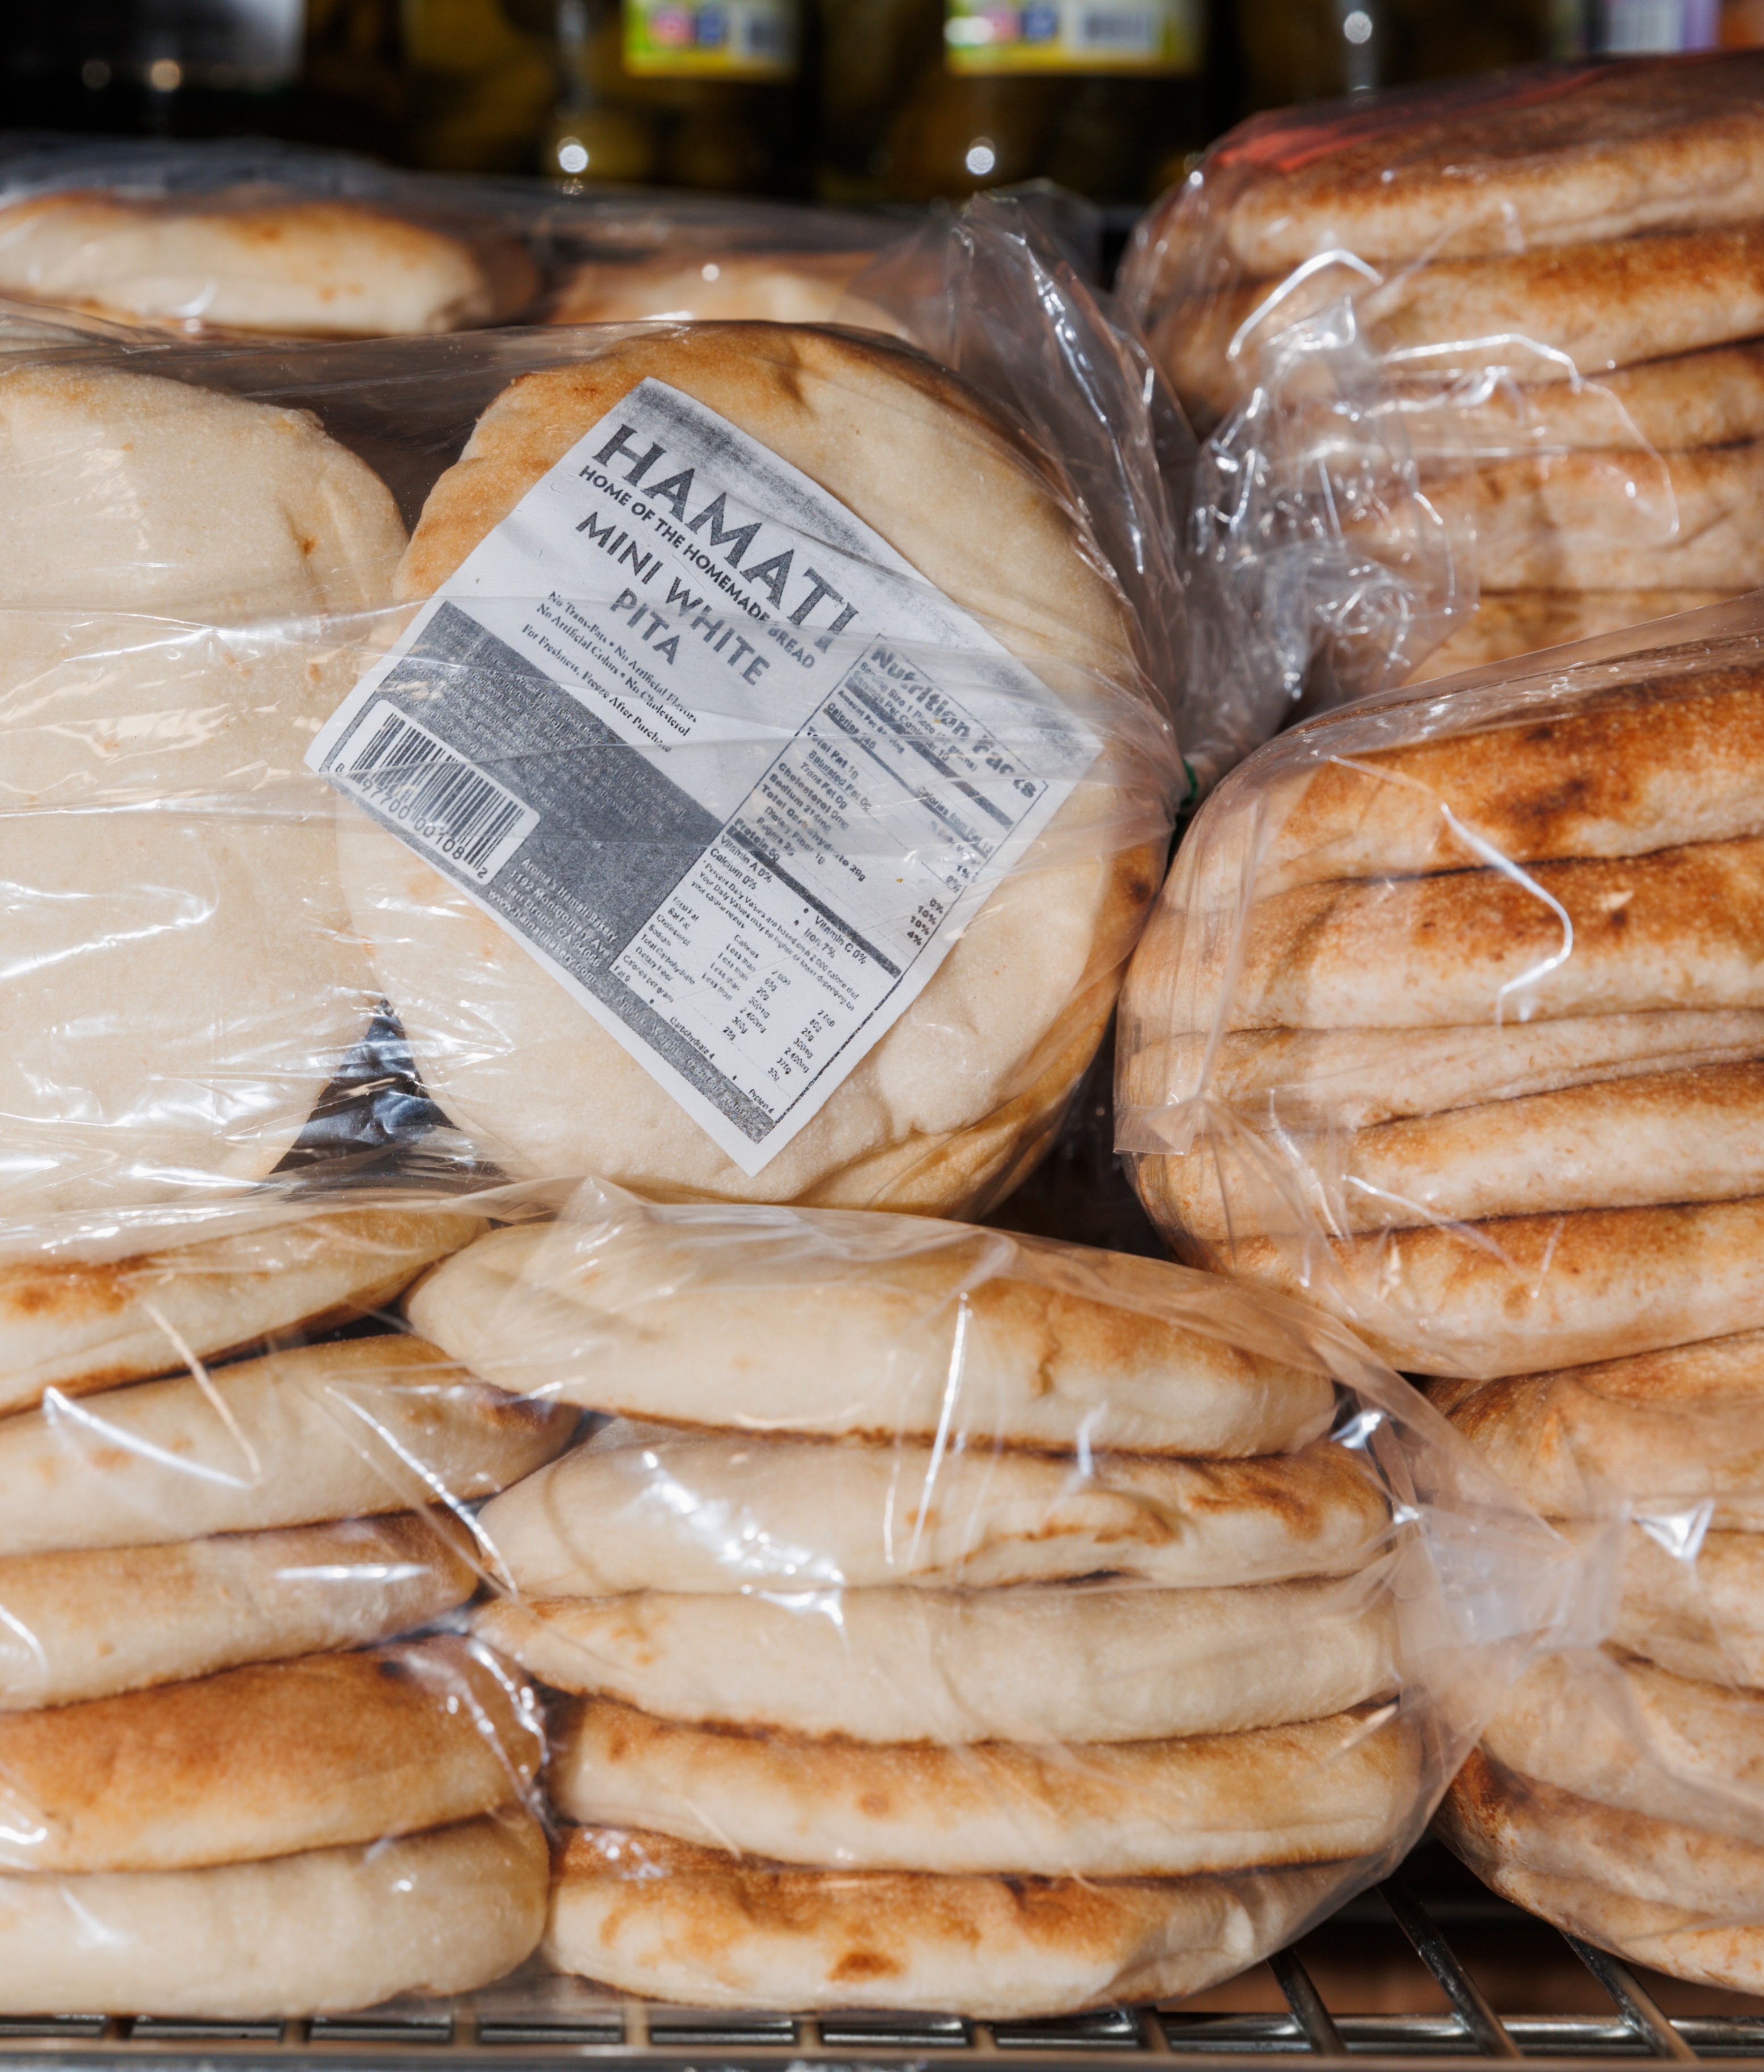 The image shows several packages of mini white pita bread, labeled with nutritional information, stacked on a metal shelf in a store.